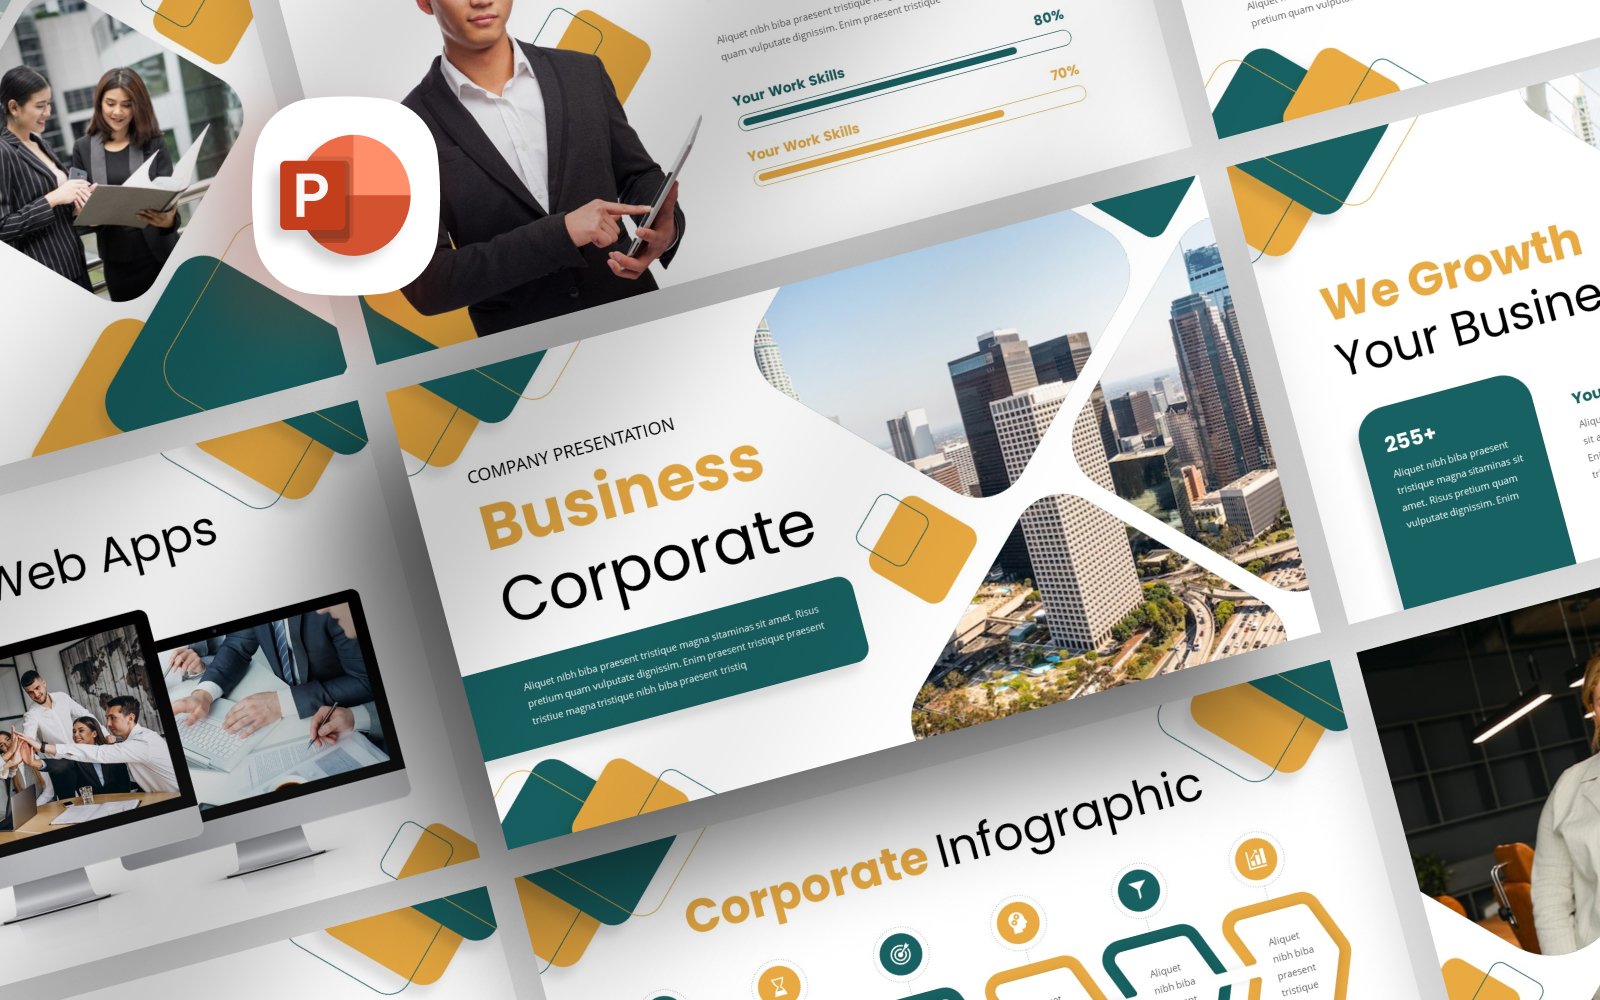 Template #398048 Corporate Company Webdesign Template - Logo template Preview